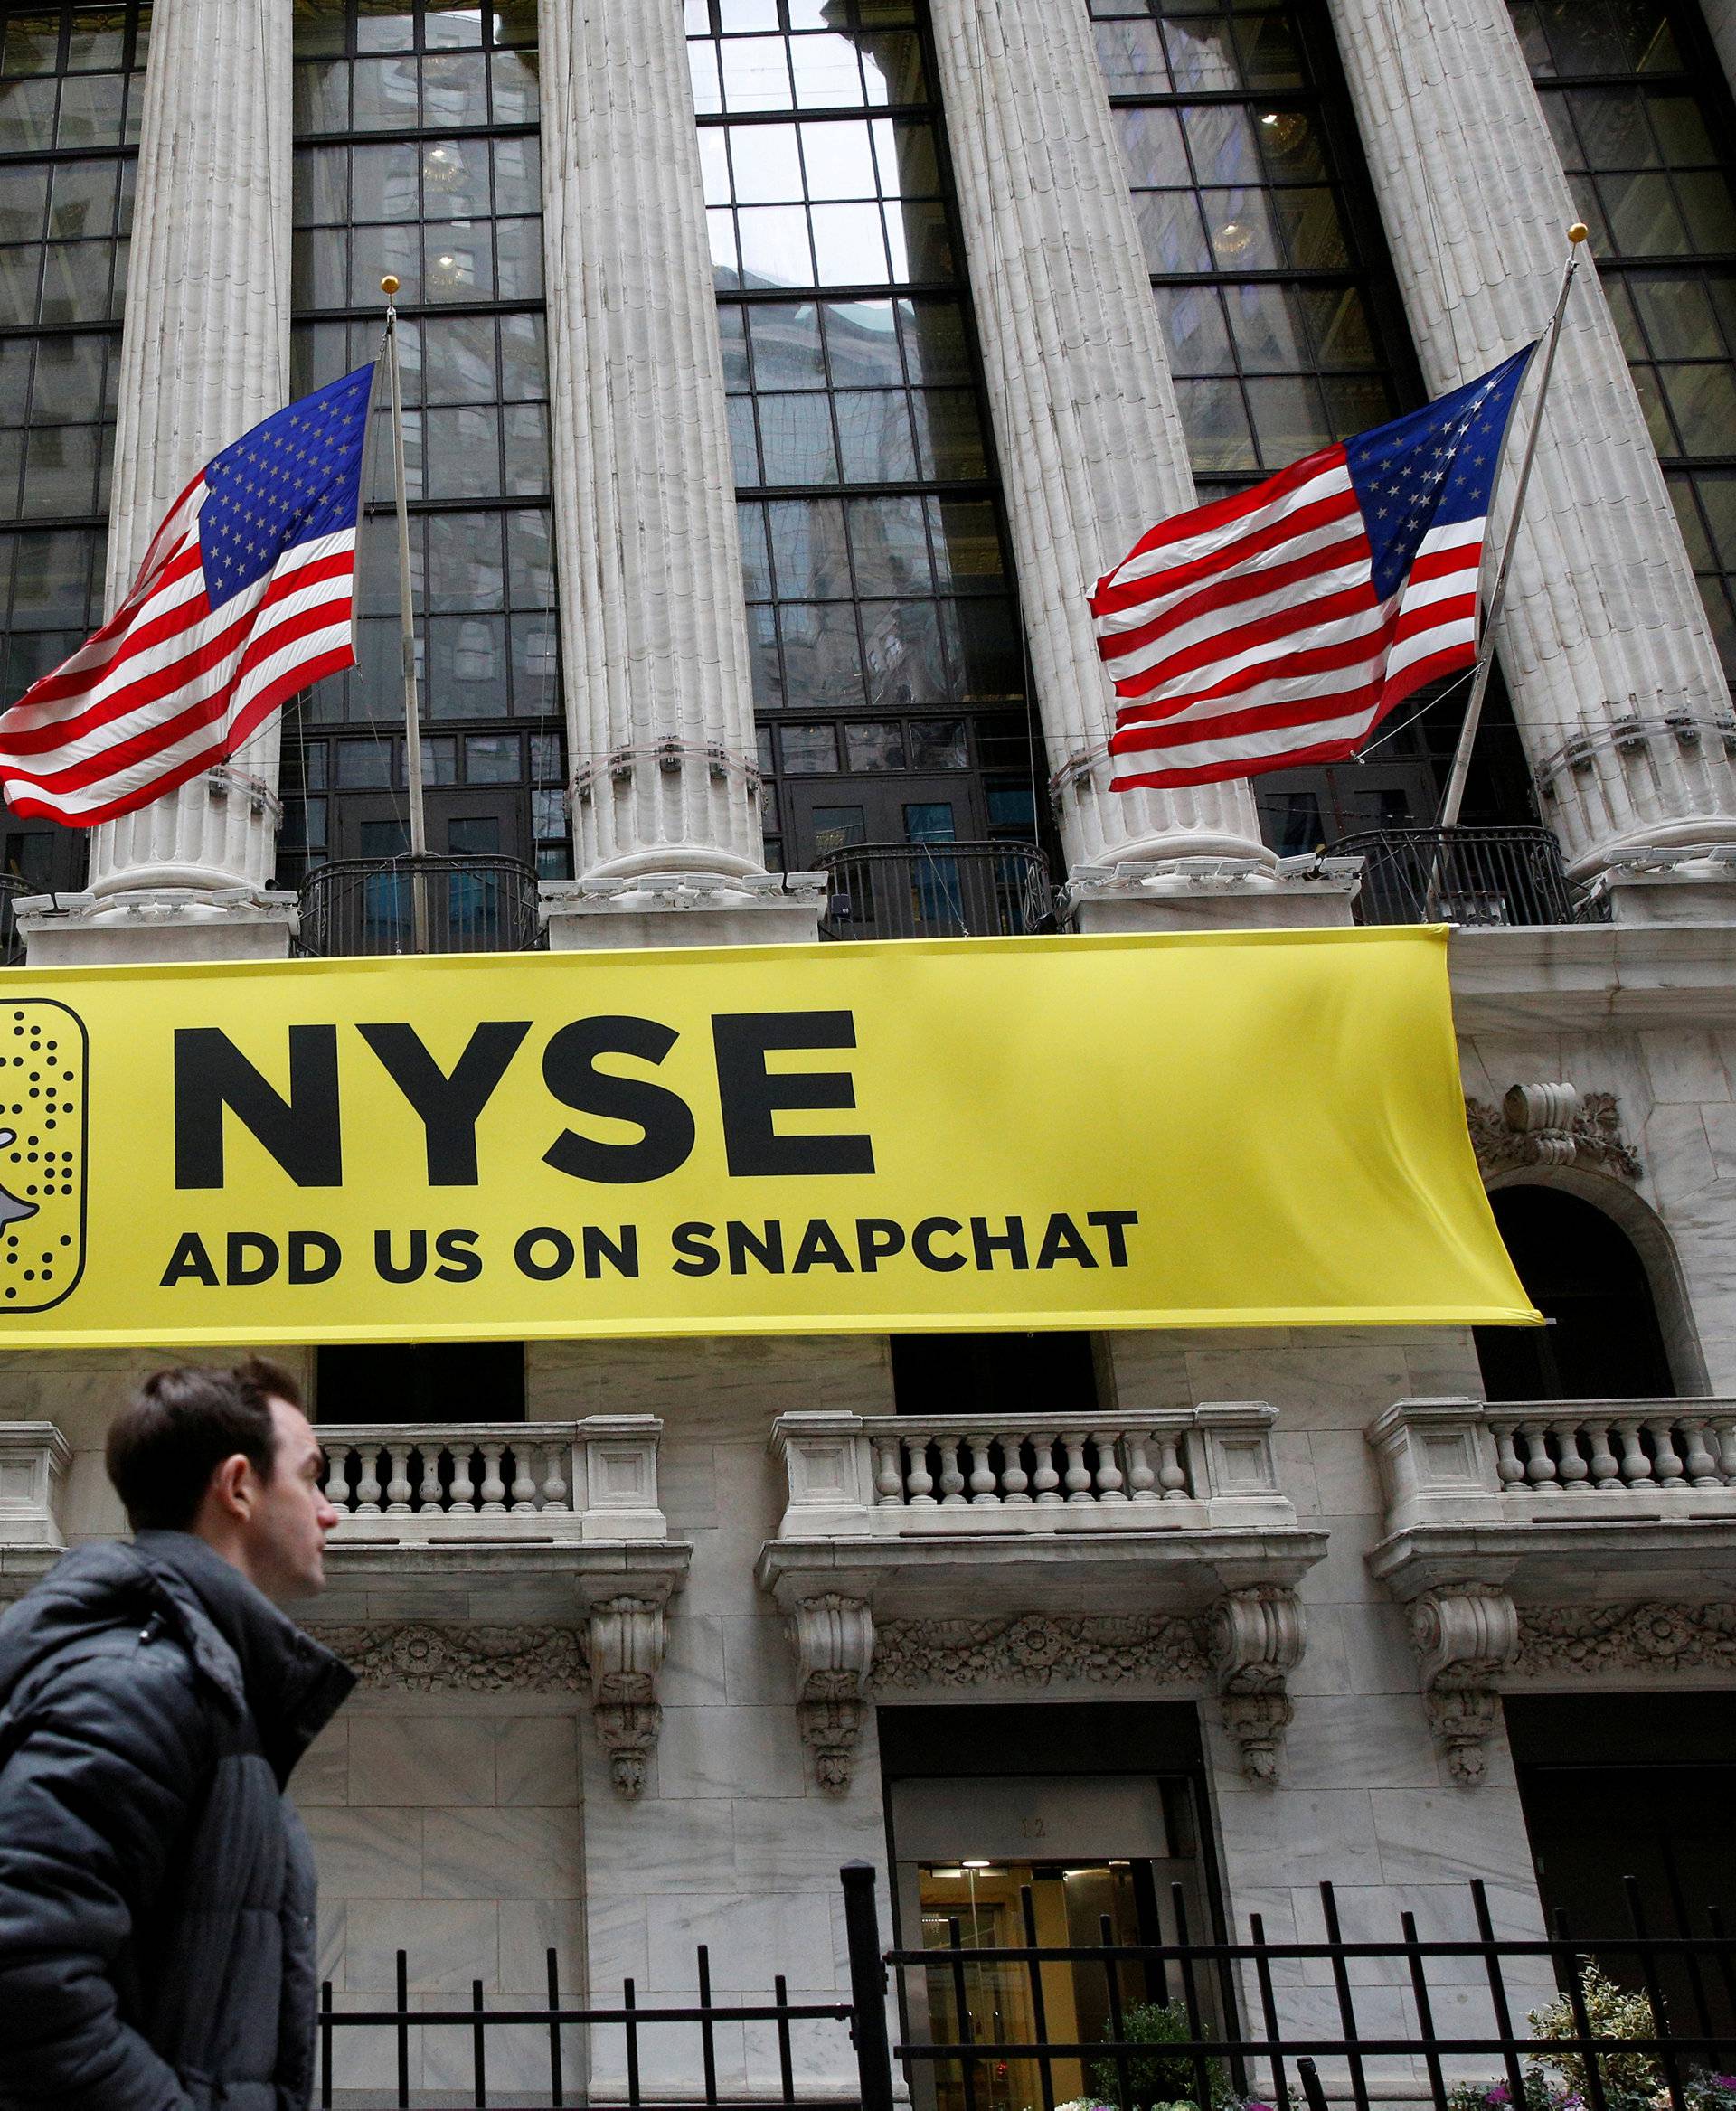 FILE PHOTO - A Snapchat sign hangs on the facade of the NYSE in New York City